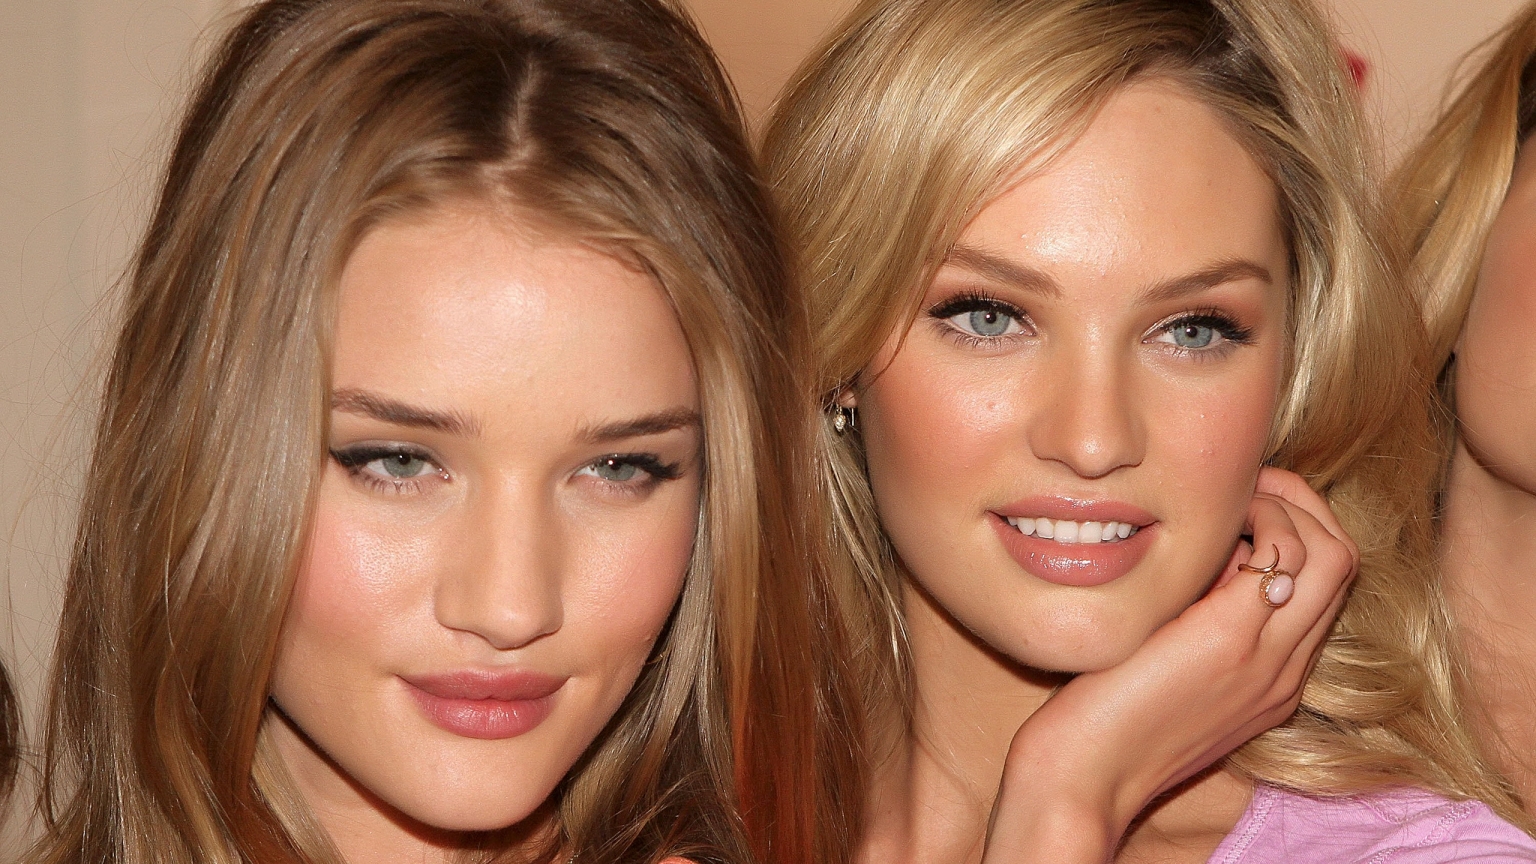 Rosie and Candice for 1536 x 864 HDTV resolution